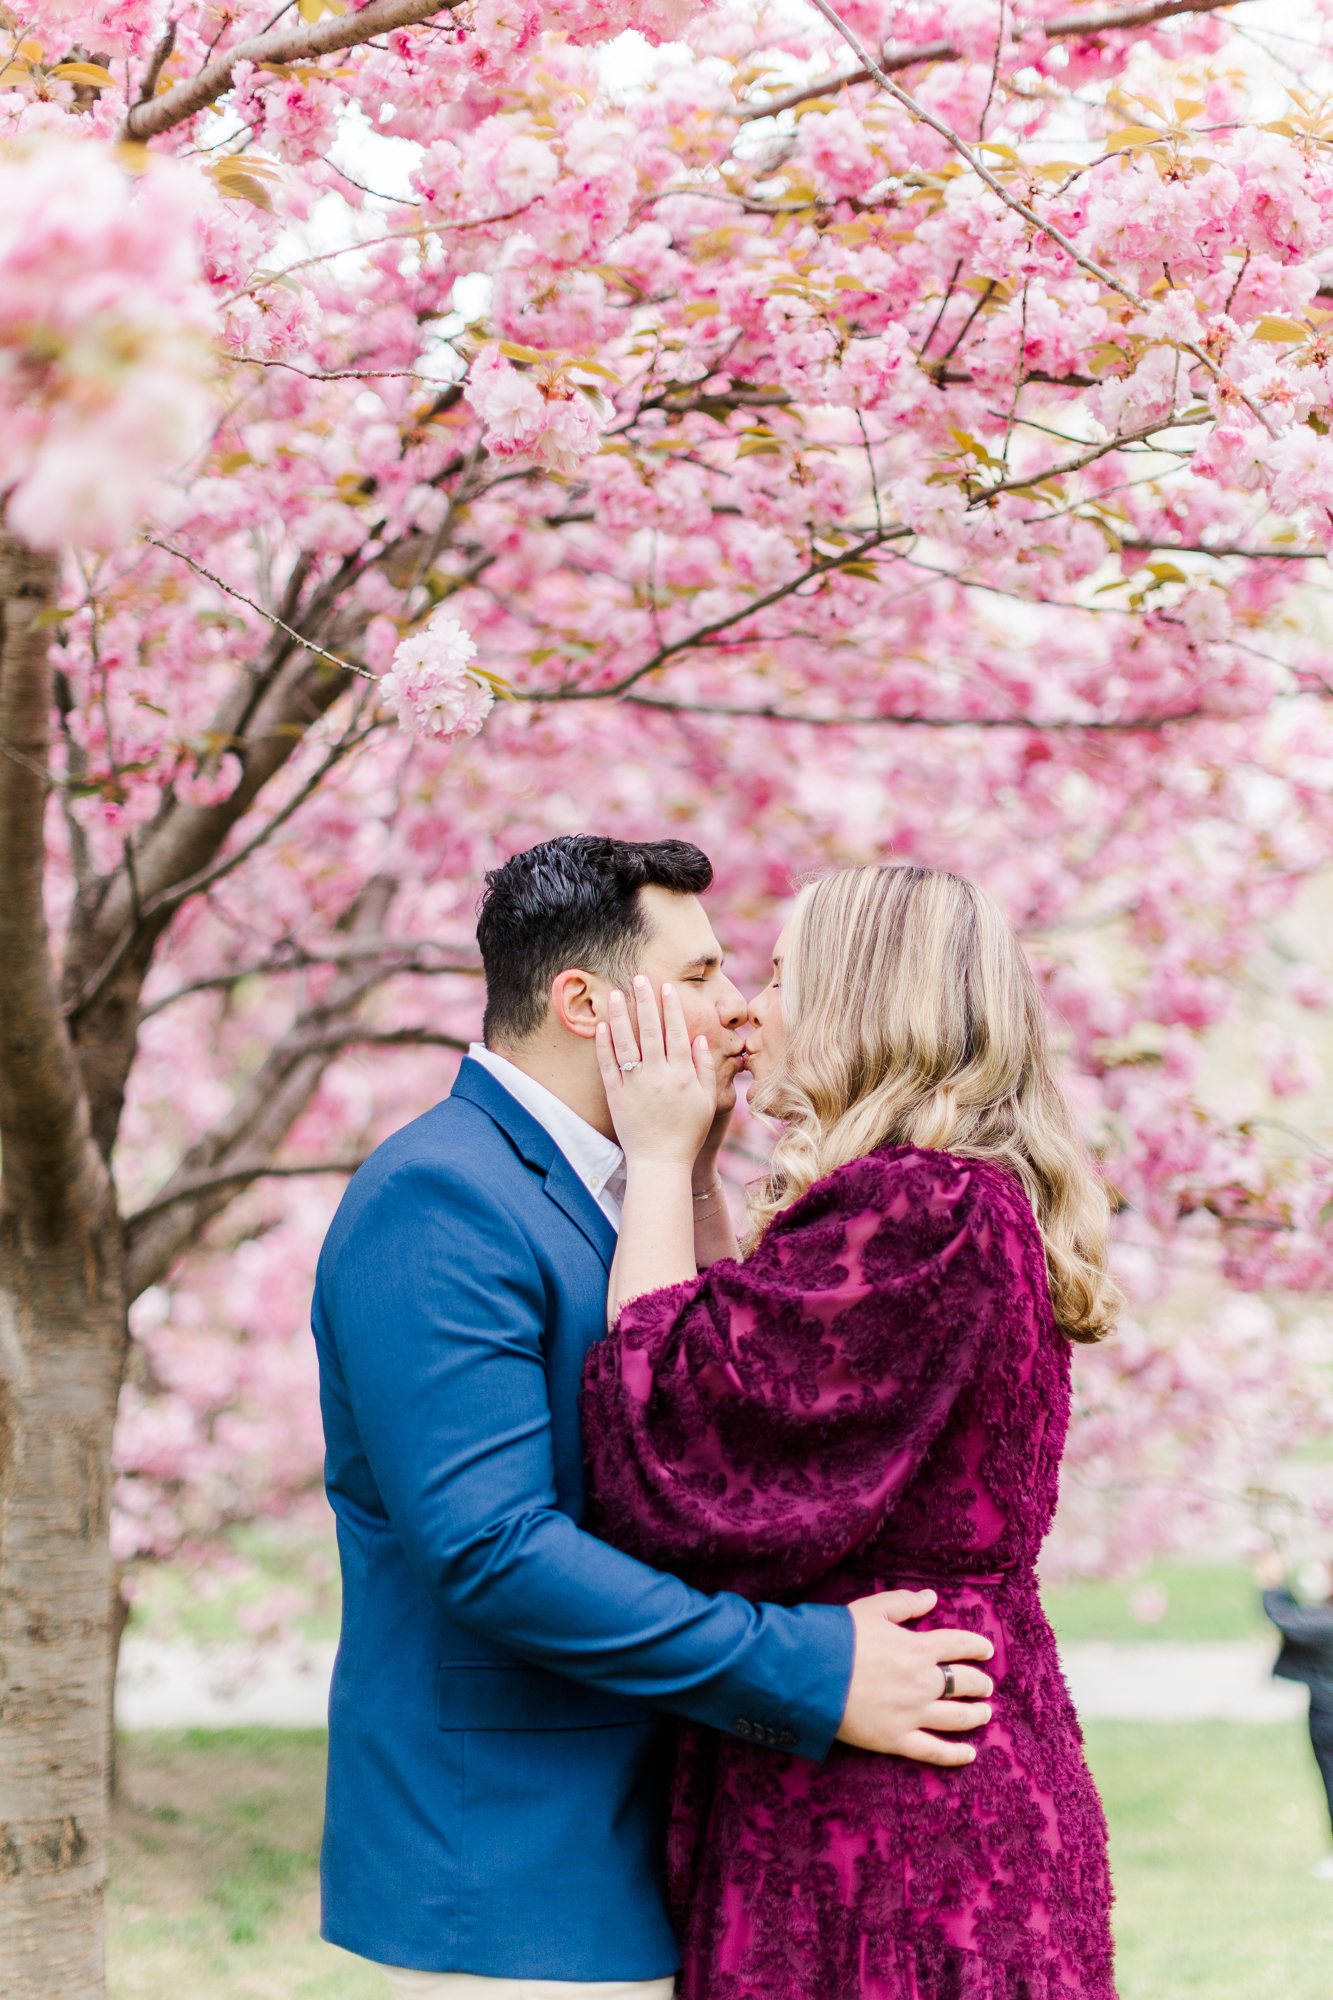 Whimsical Engagement Pictures in Central Park